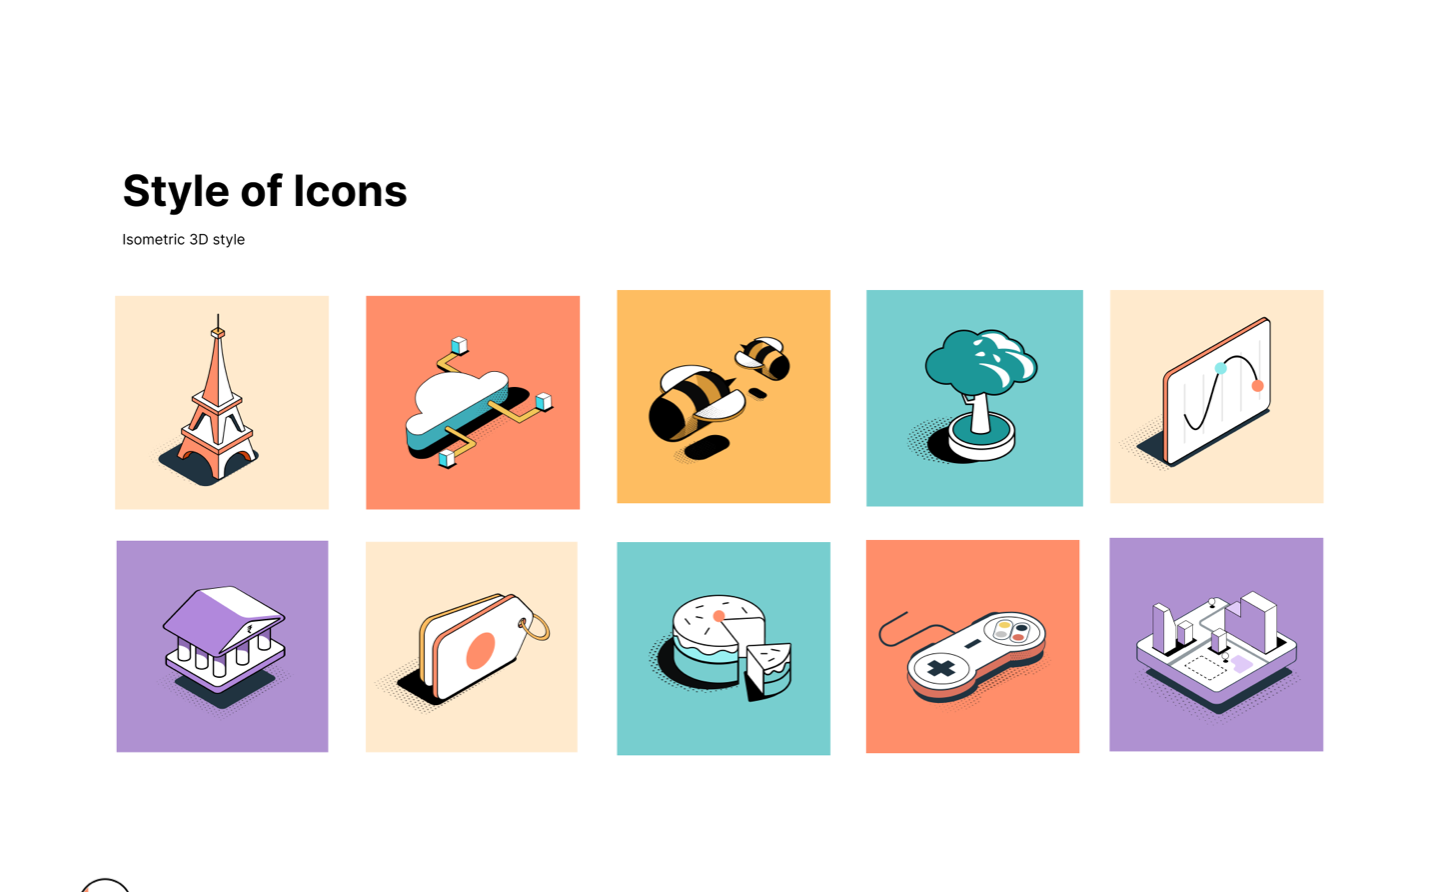 STYLE OF ICON